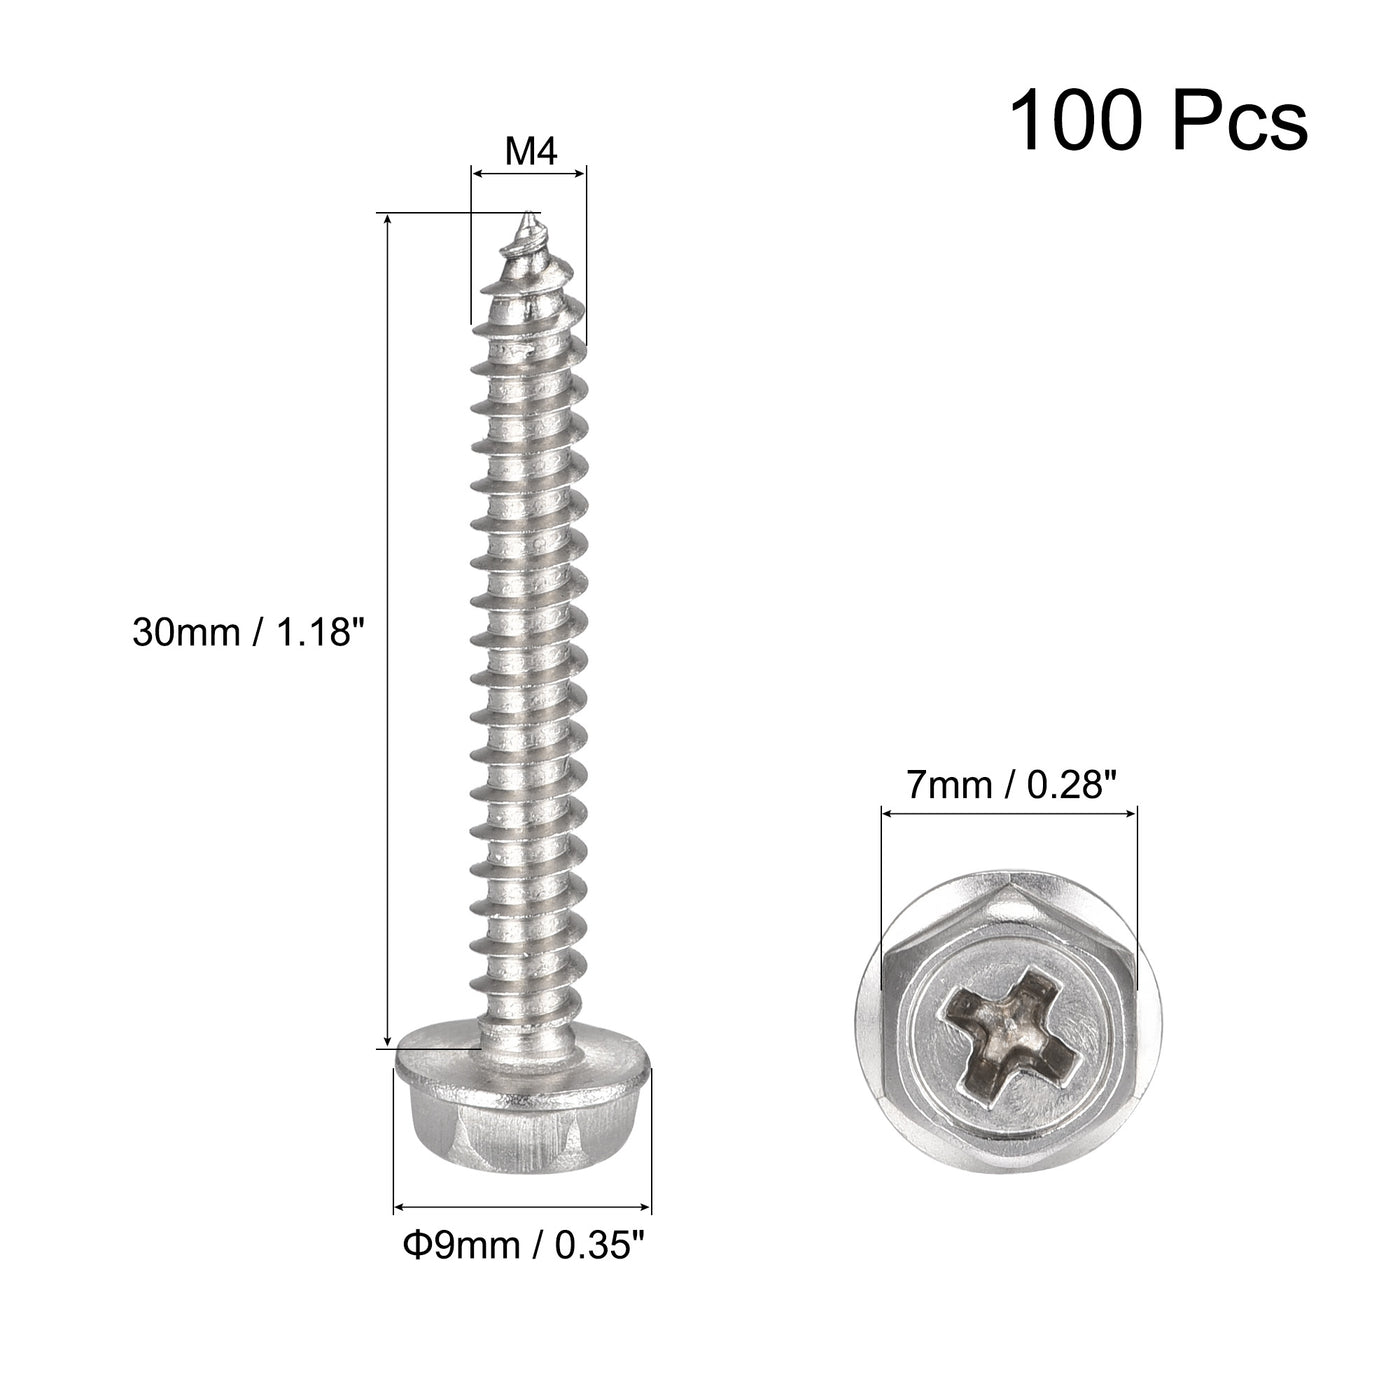 uxcell Uxcell Phillips Hex Washer Self Tapping Screws, M4 x 30mm 304 Stainless Steel Hex Flange Sheet Metal Screw 100pcs